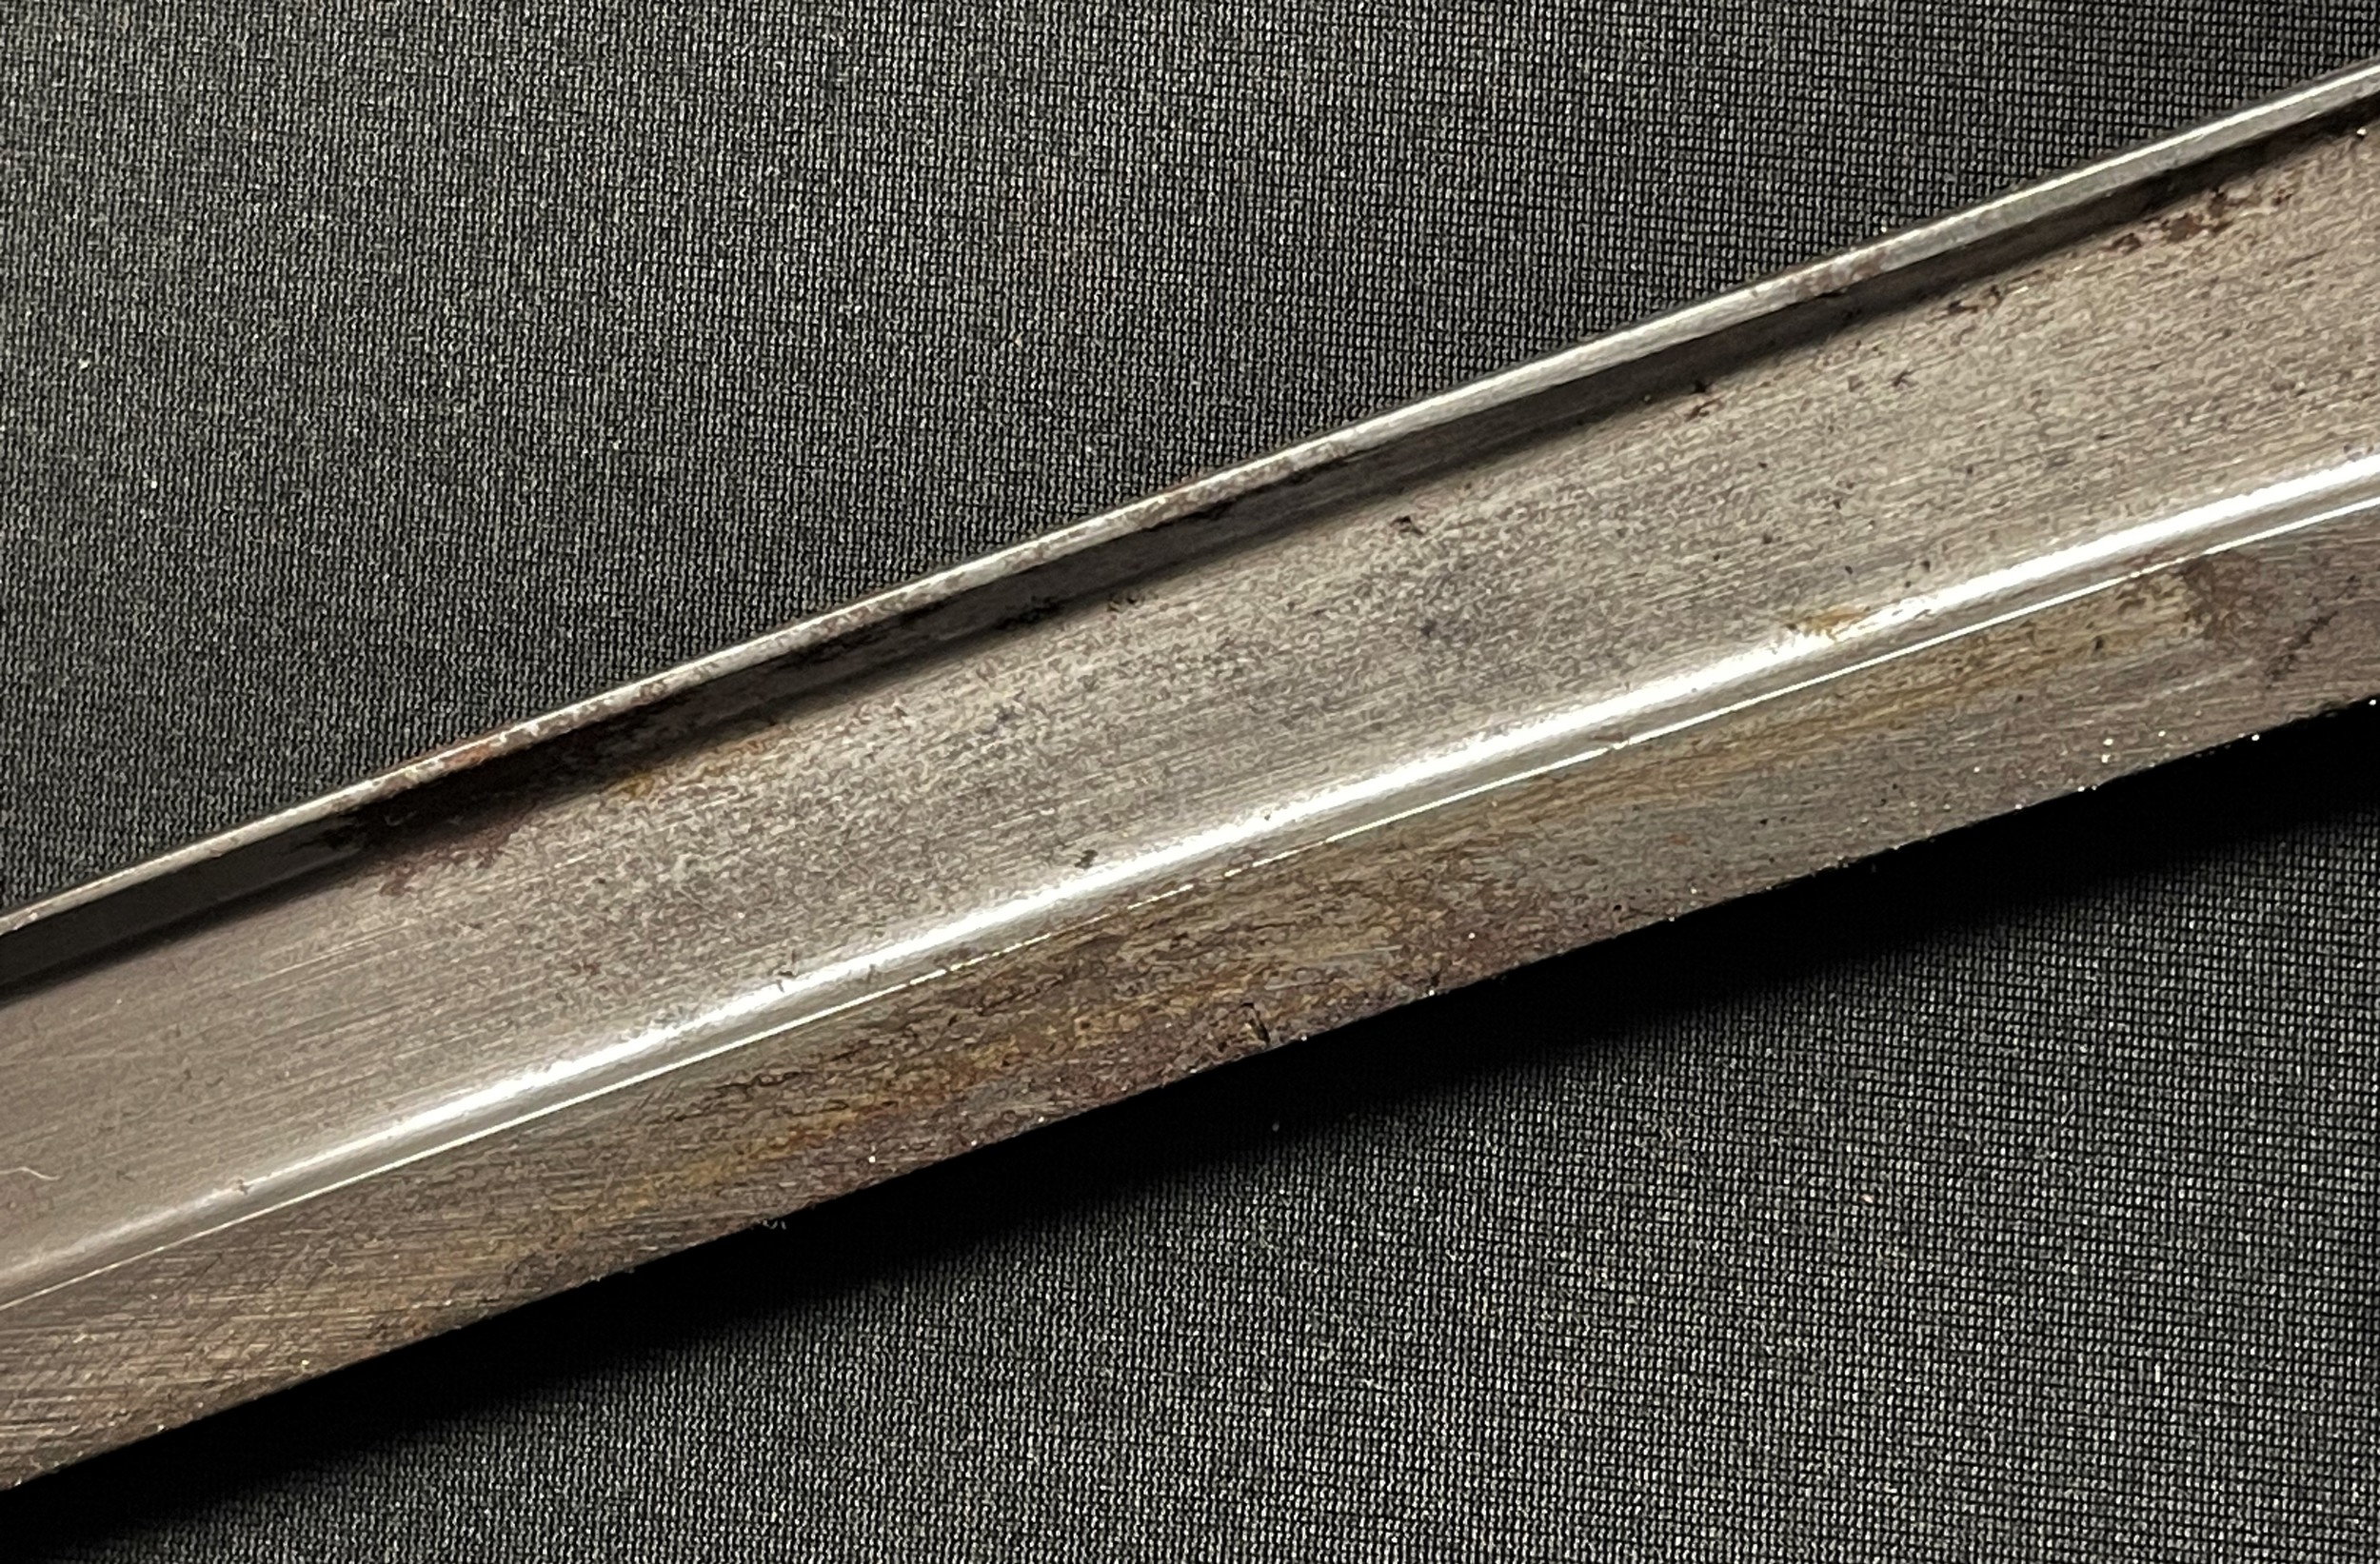 French 1866 Pattern Chassepot Bayonet with single edged fullered blade 574mm in length. Maker marked - Image 6 of 24